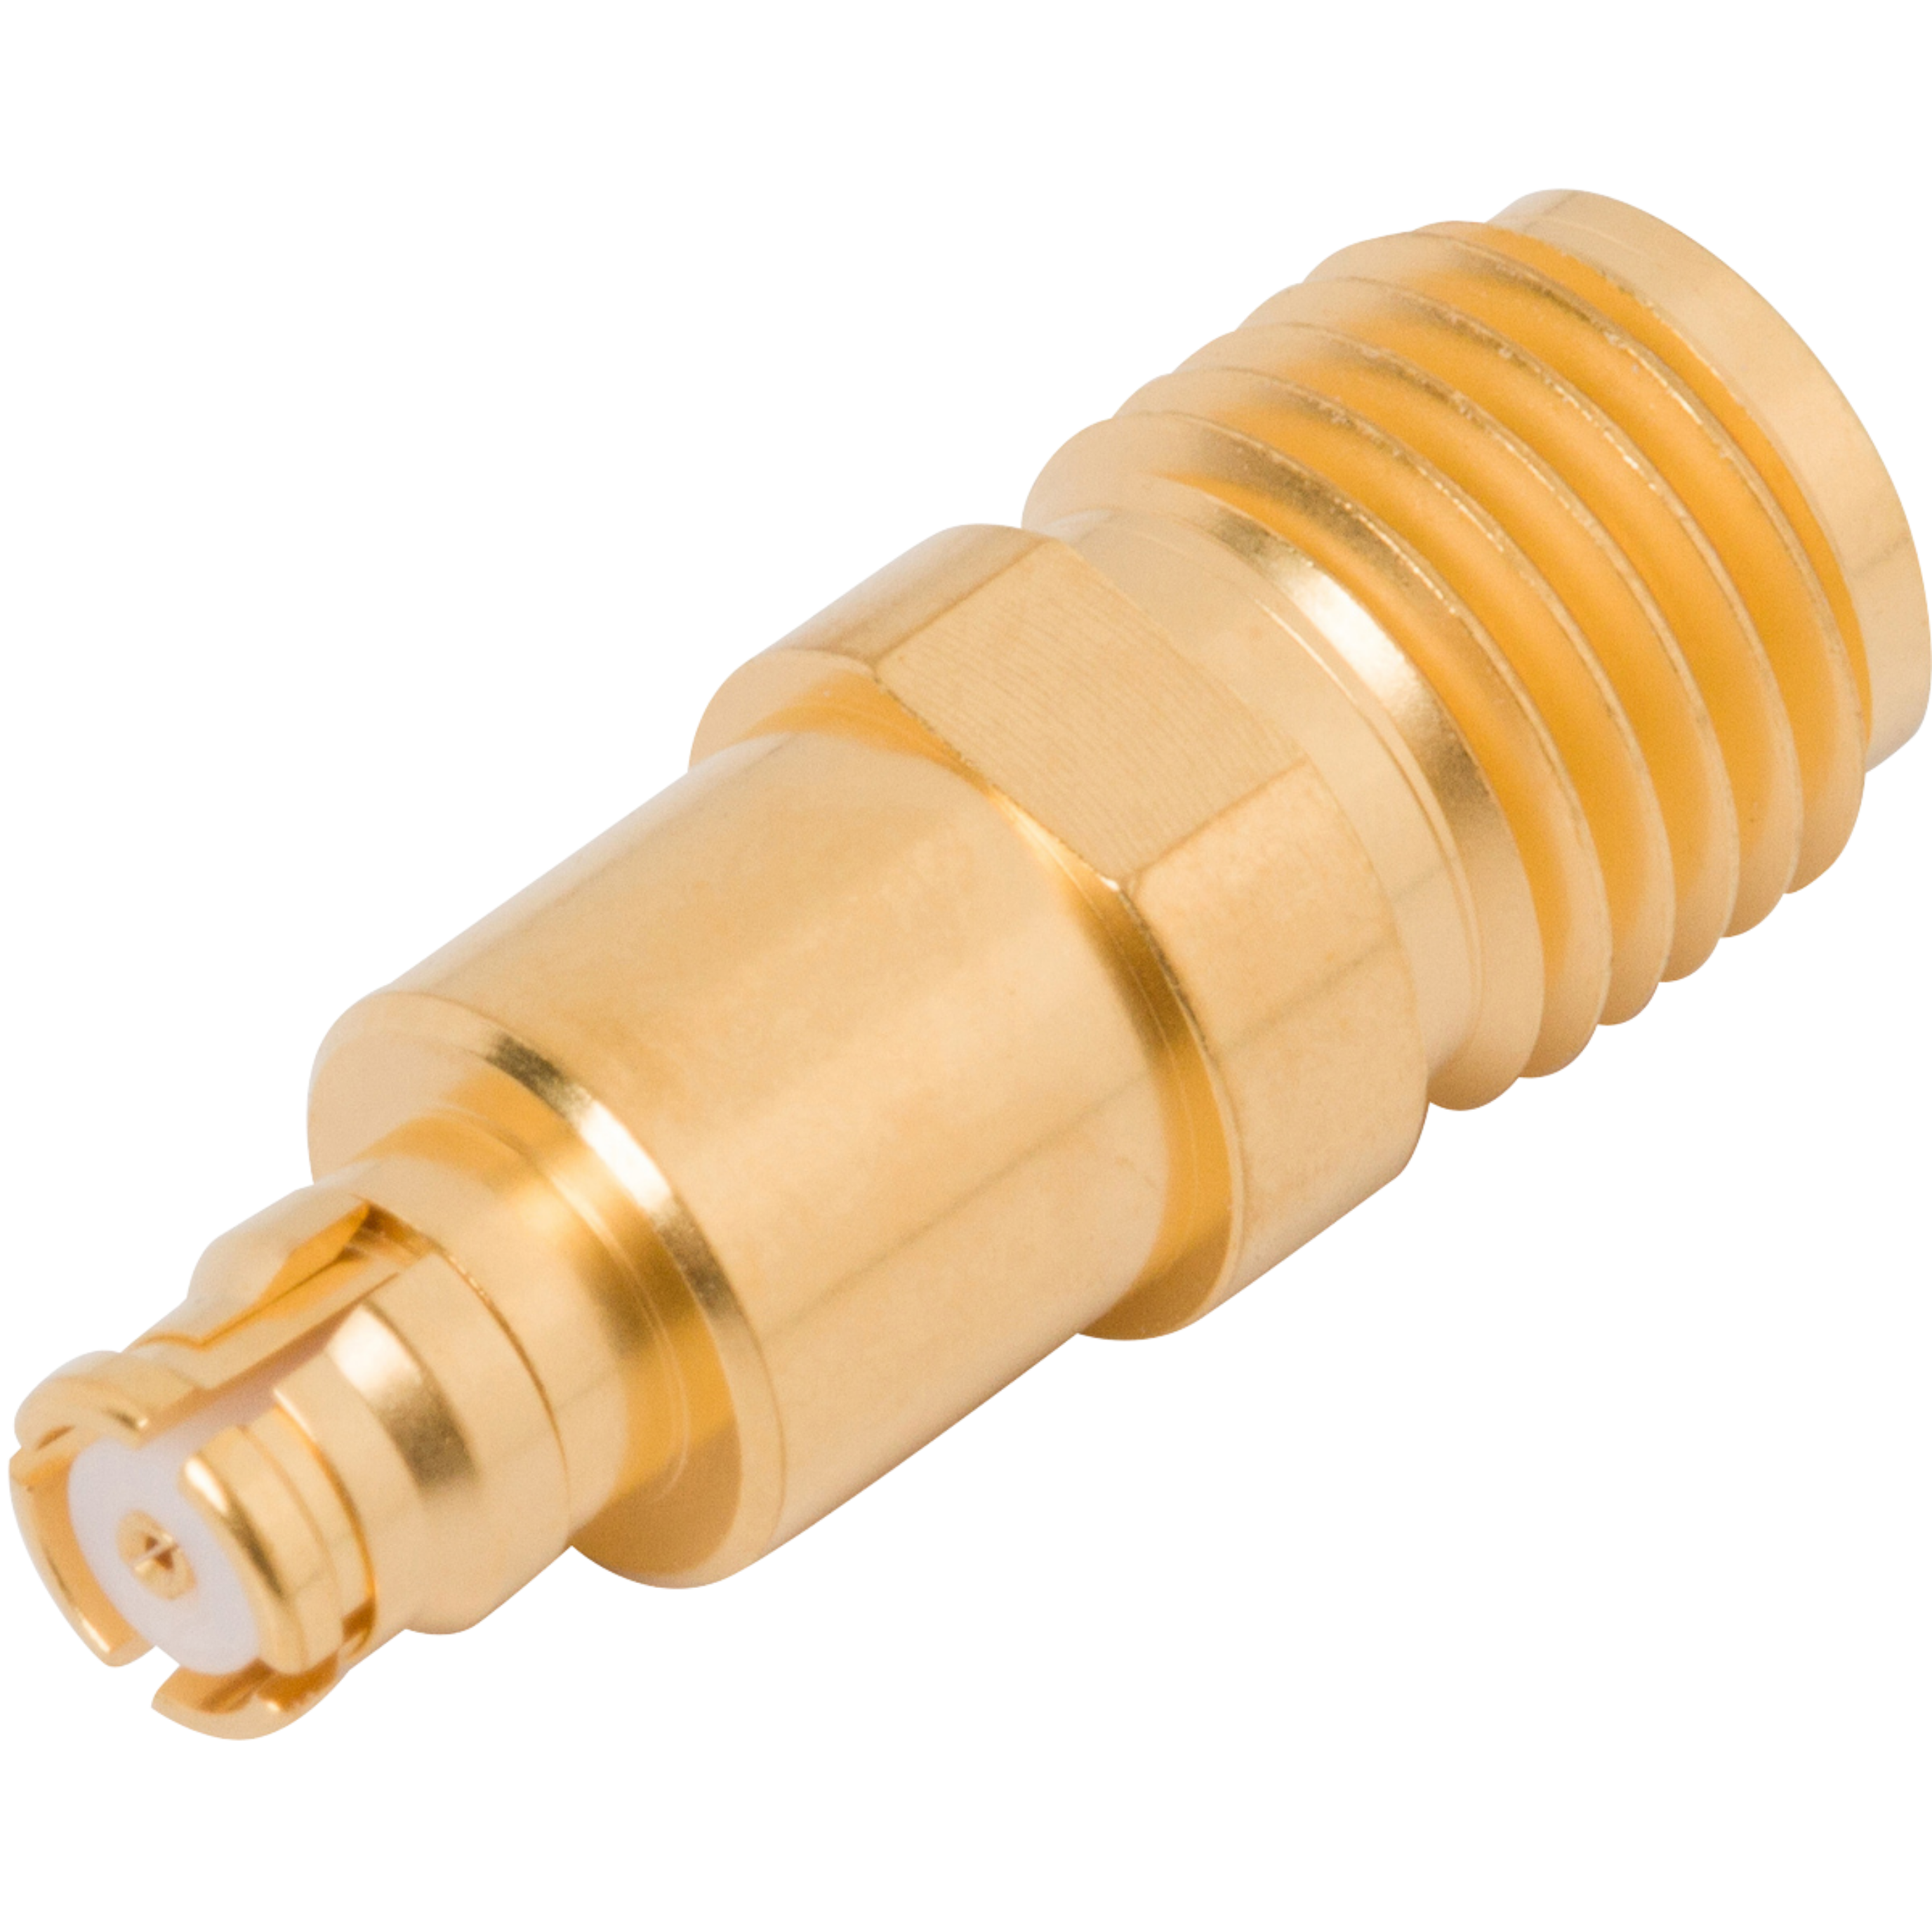 SMP Female to 2.92mm Female Adapter, 1115-6083